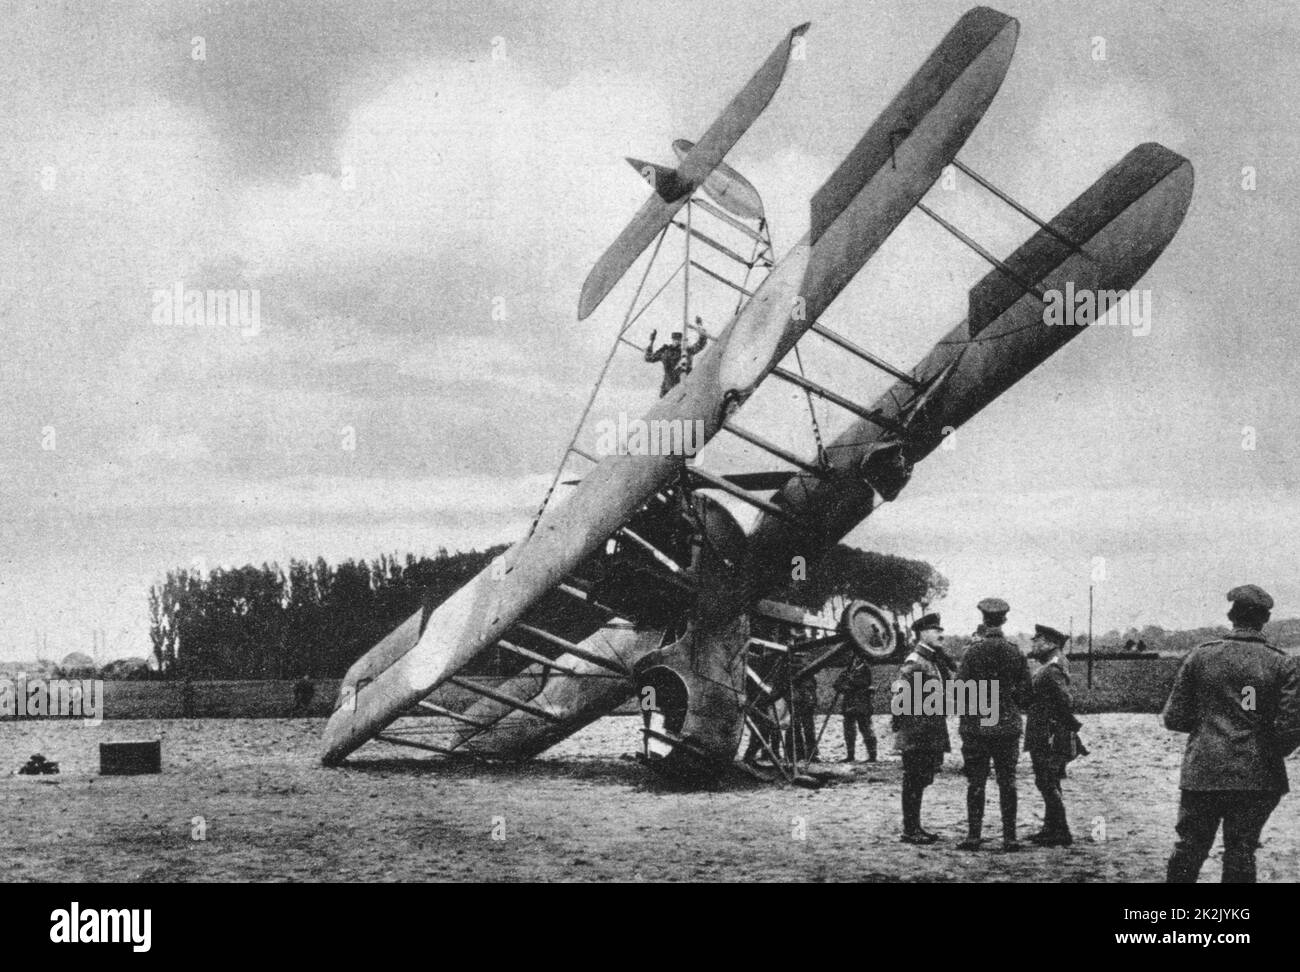 World War I 1914-1918:  A British Vickers biplane that had crashed near Lille, France, being examined by Germans, 1917. Stock Photo